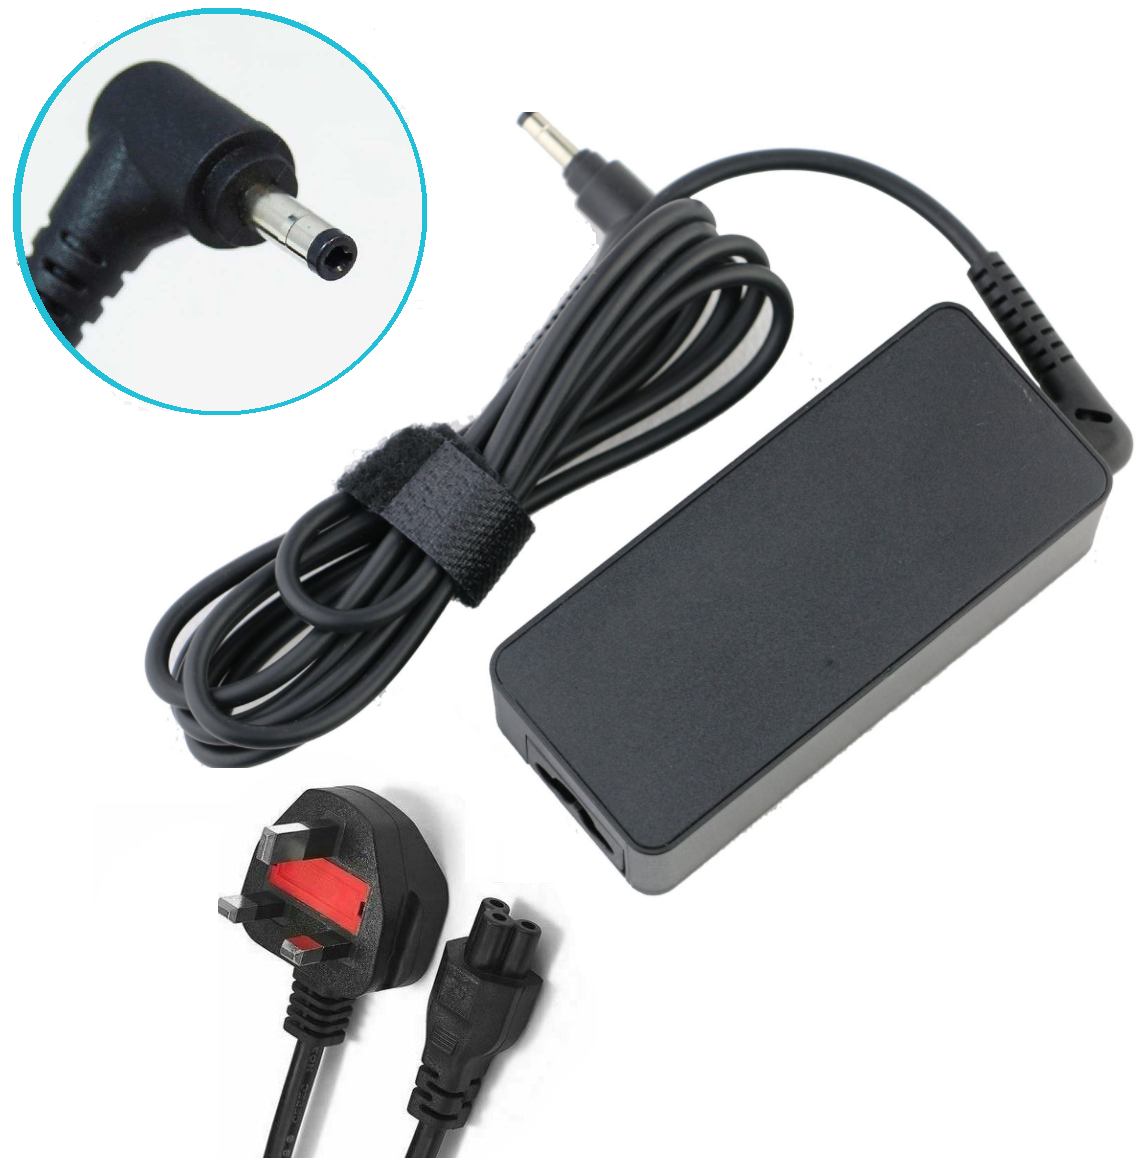 Lenovo Ideapad Laptop Charger - laptopchargers.ie